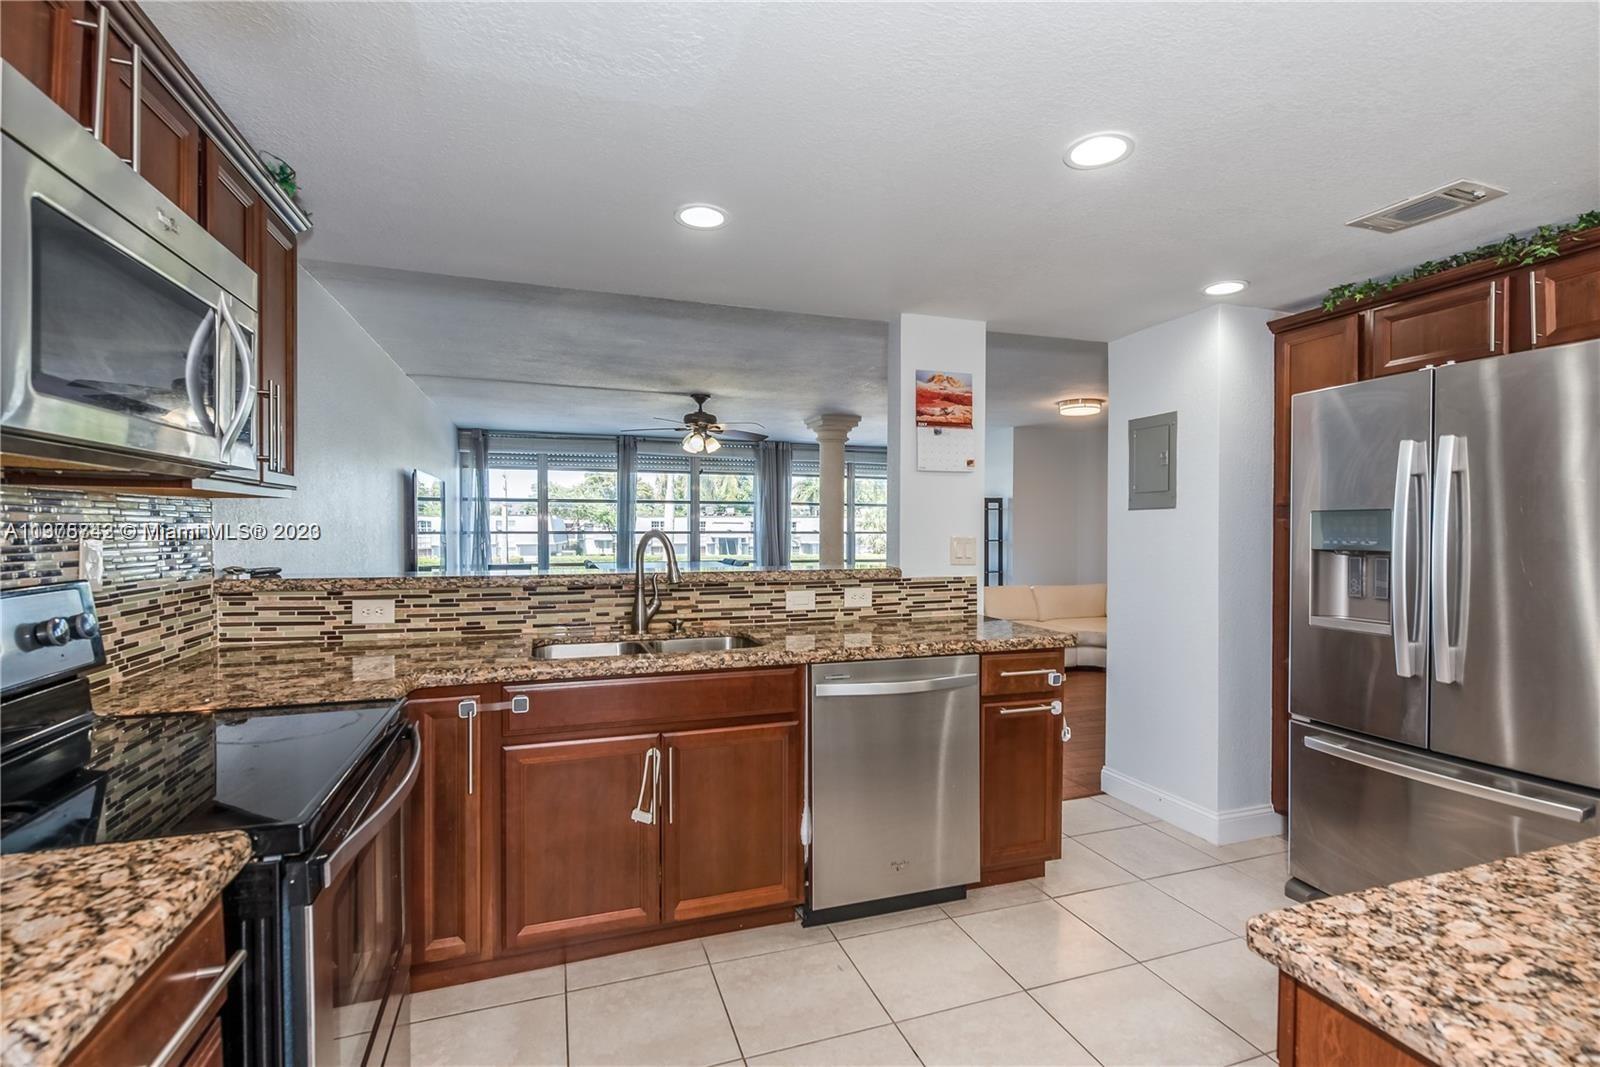 a kitchen with stainless steel appliances granite countertop a stove top oven microwave and refrigerator